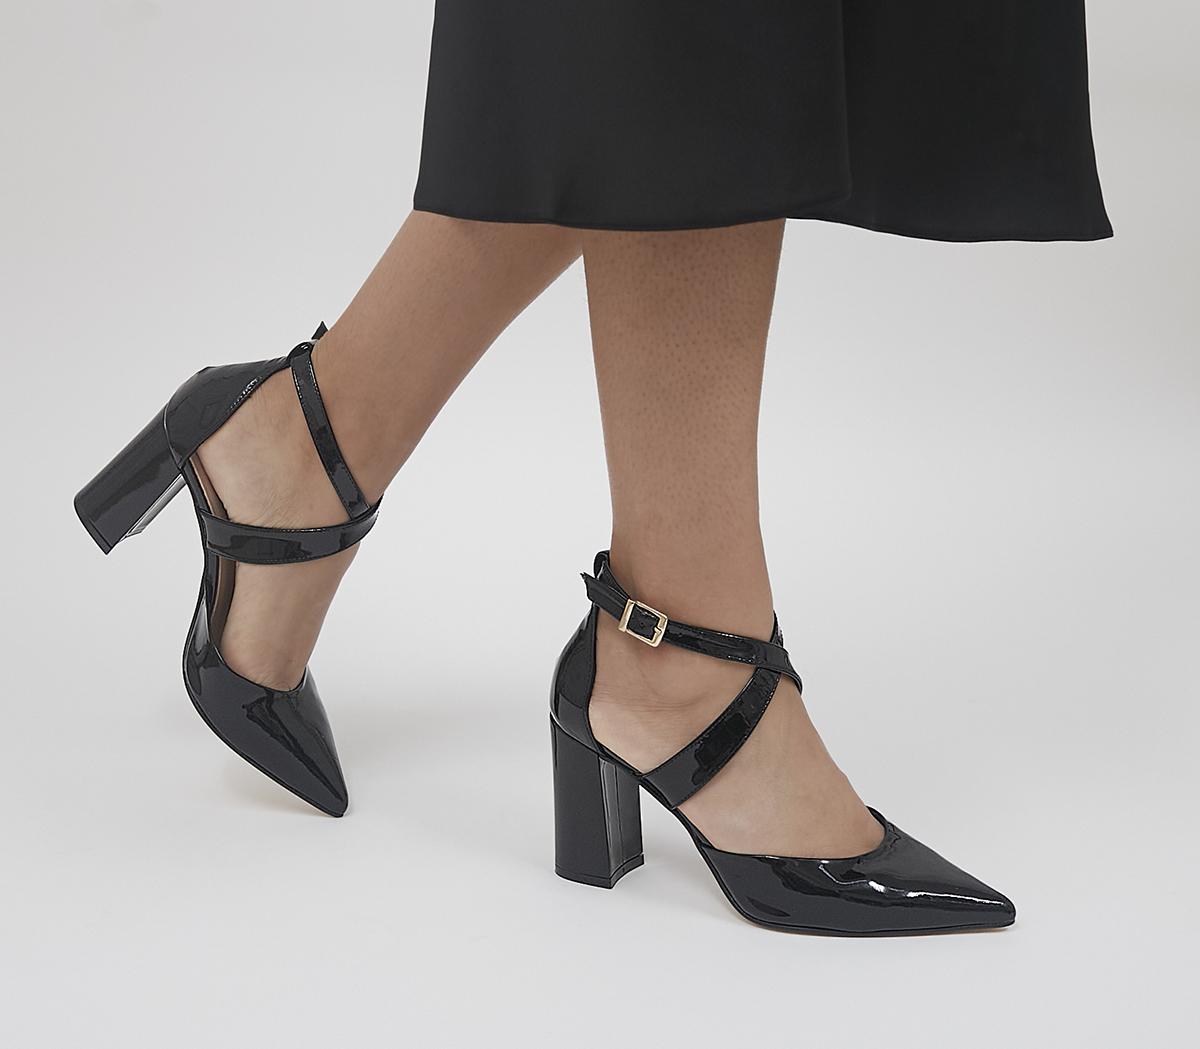 OFFICEMarne Cross Over Pointed Court Block HeelsBlack Patent Leather